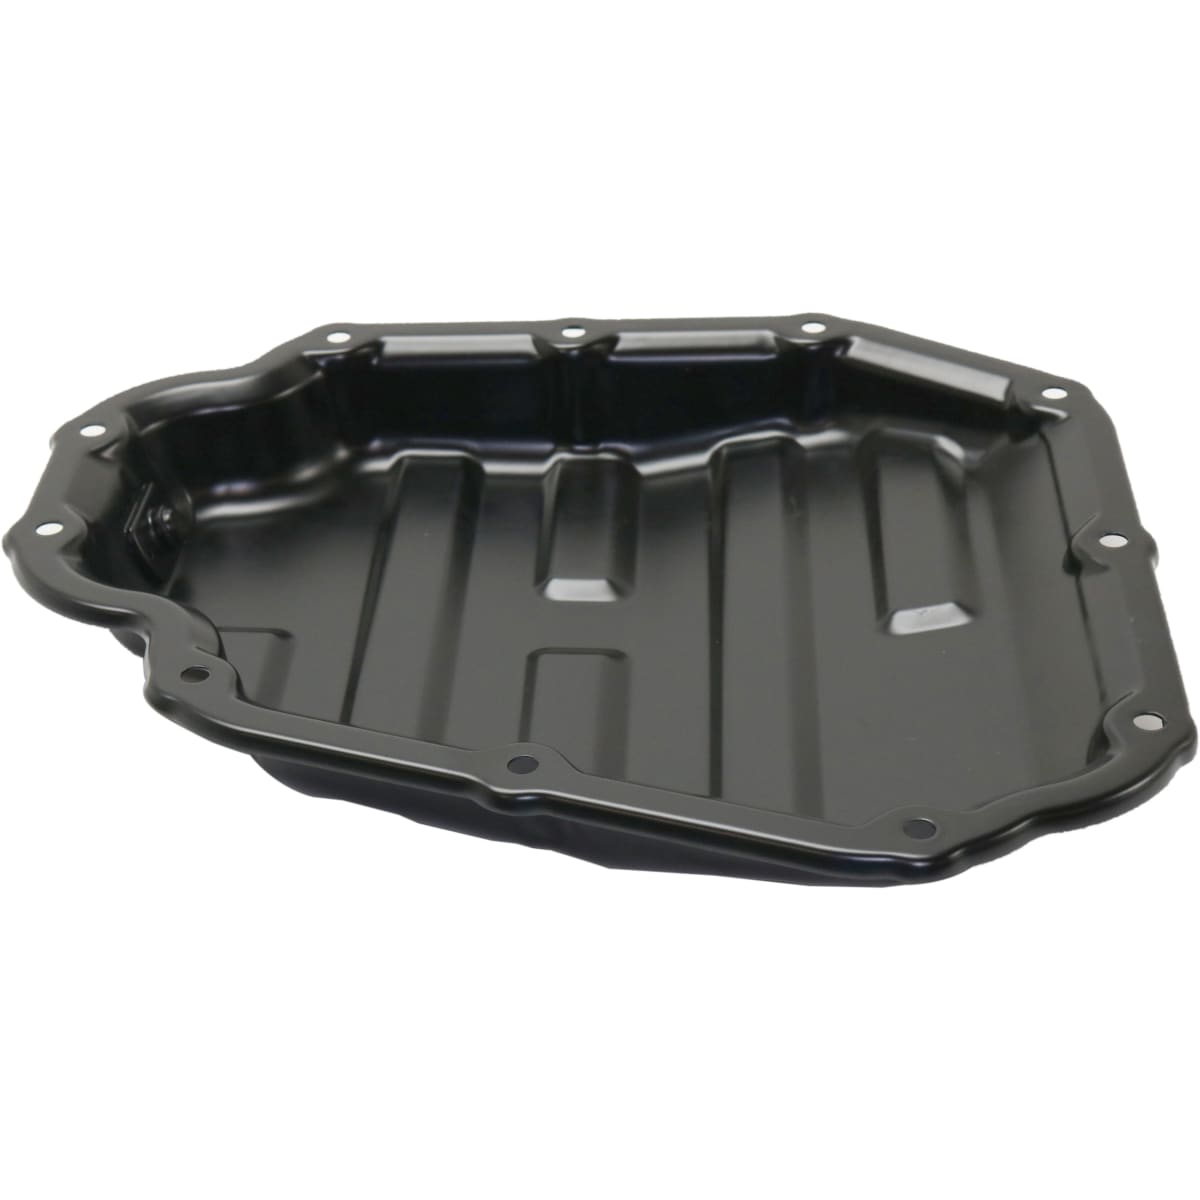 2017 Nissan Rogue Oil Pan Lower, 2.5 Liter Engine RN31130001 by